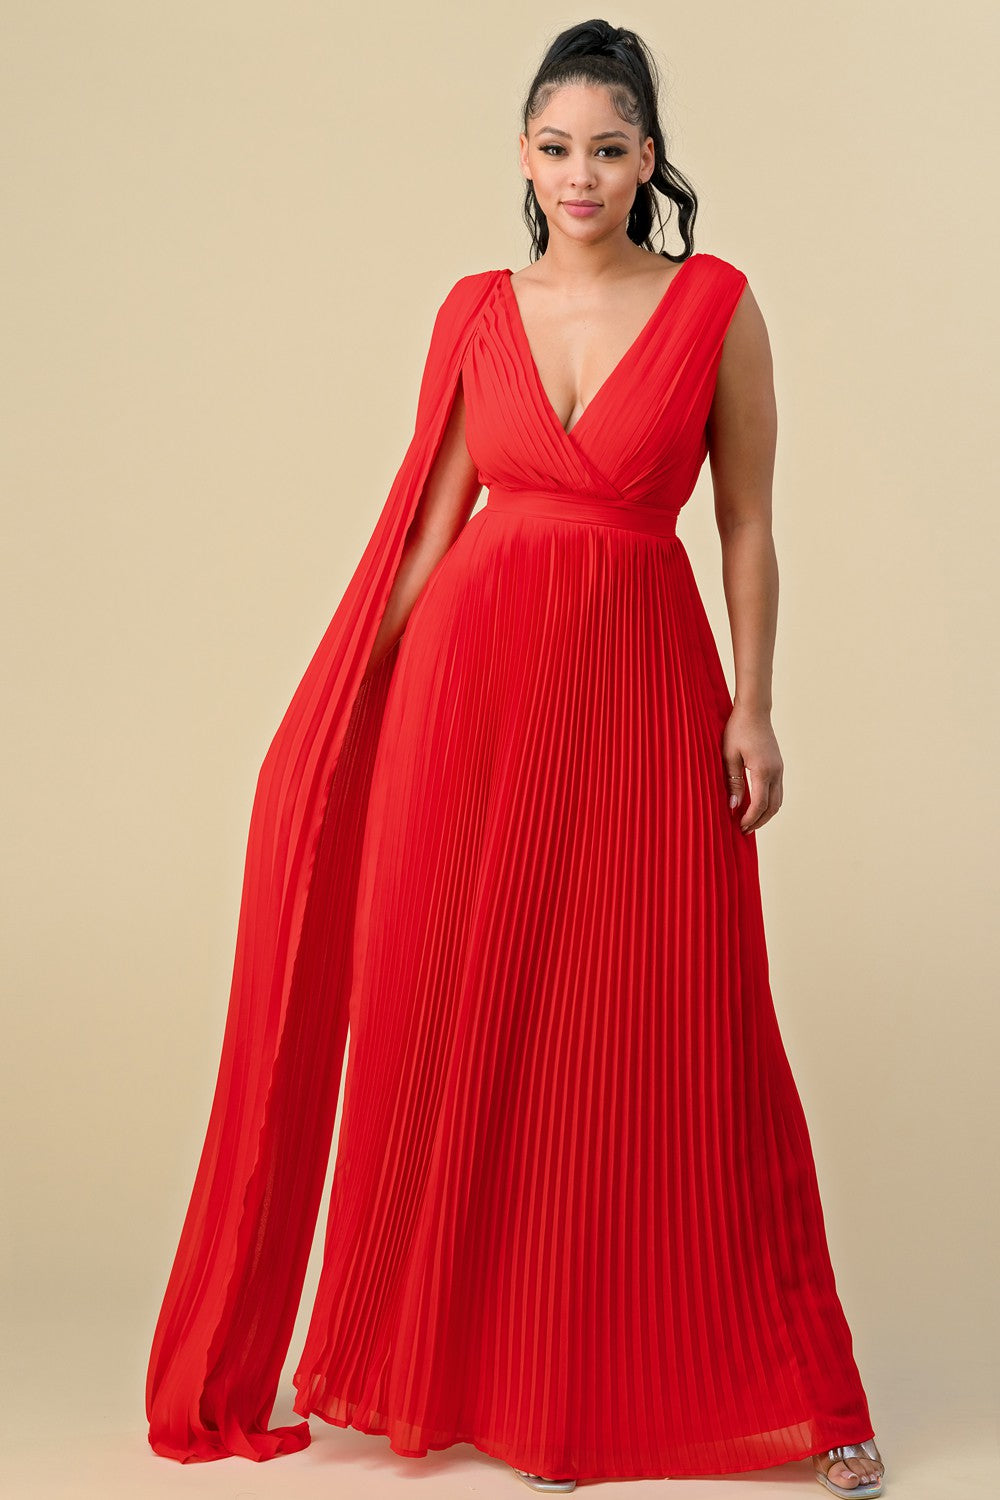 Formal Dresses Long Sleeveless Pleated Maxi Dress Tomato Red